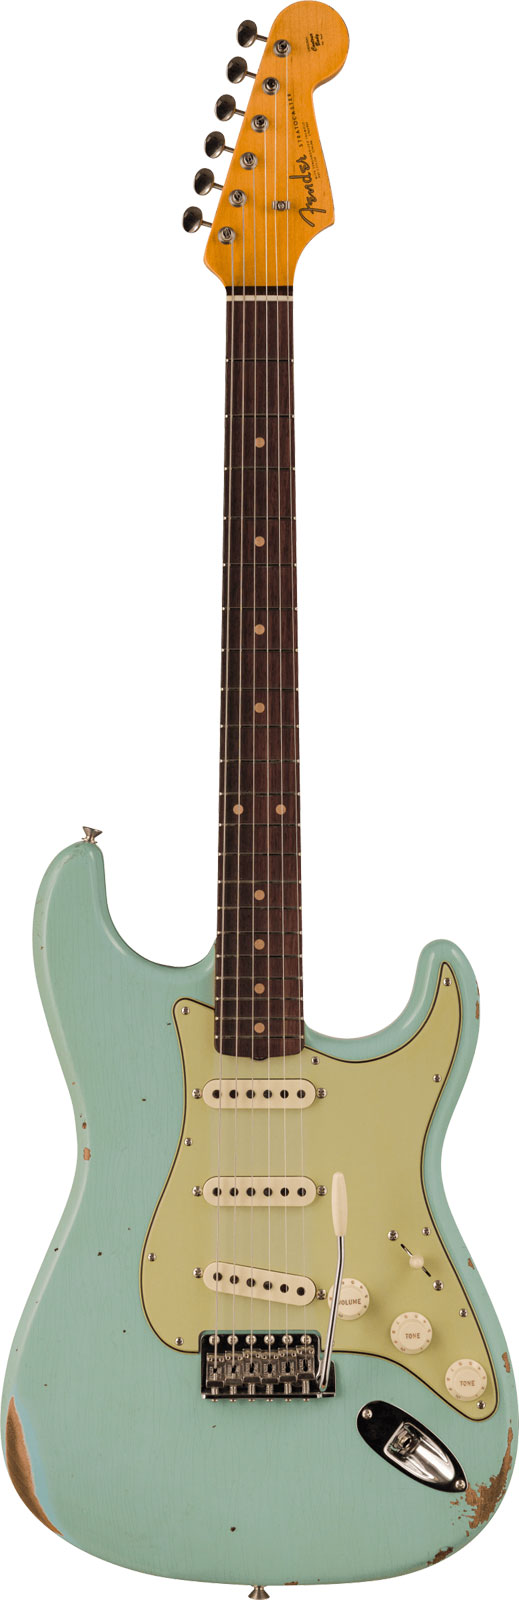 LATE 1962 STRATOCASTER RELIC WITH CLOSET CLASSIC HARDWARE RW FADED AGED DAPHNE BLUE